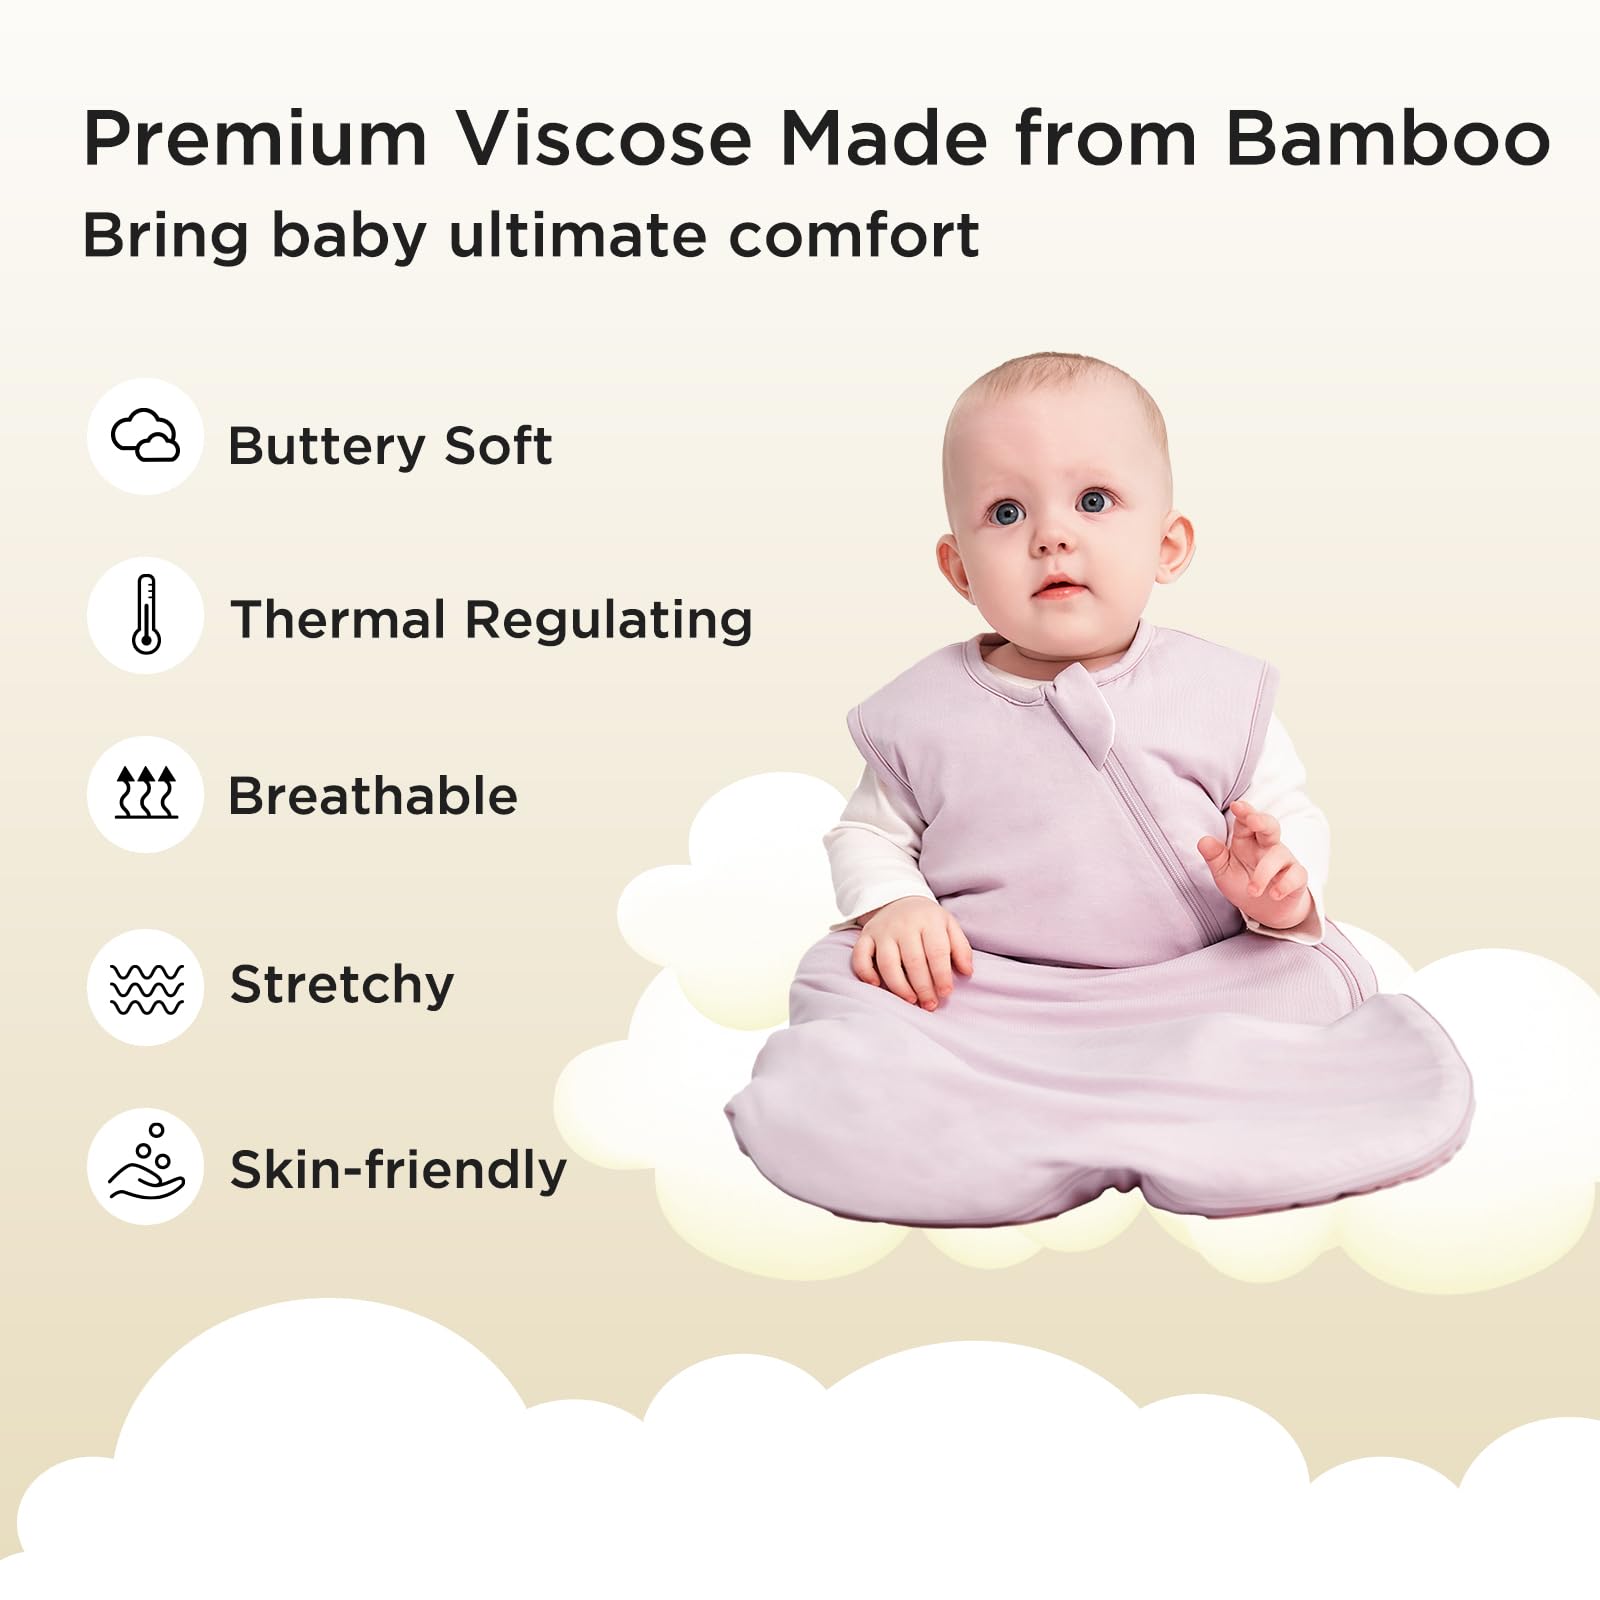 Duomiaomiao Rayon Made from Bamboo, Baby Sleep Sack Buttery Soft 1.0 TOG Baby Wearable Blanket Four Seasons